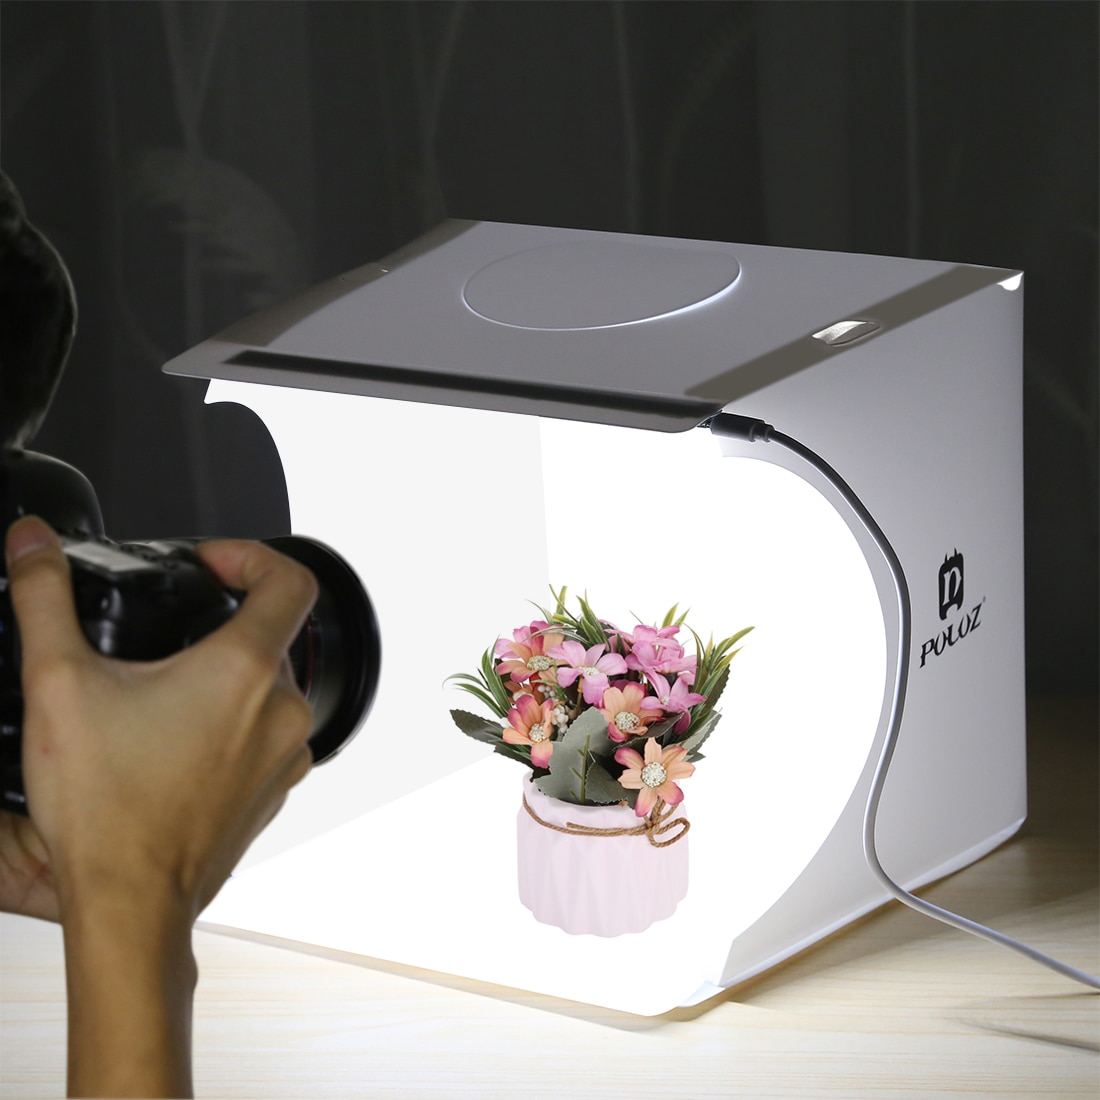 Habf5ead5f1f64036b74a6246cd9ca9947 8.7 inch Portable Photo Studio for Product Photography